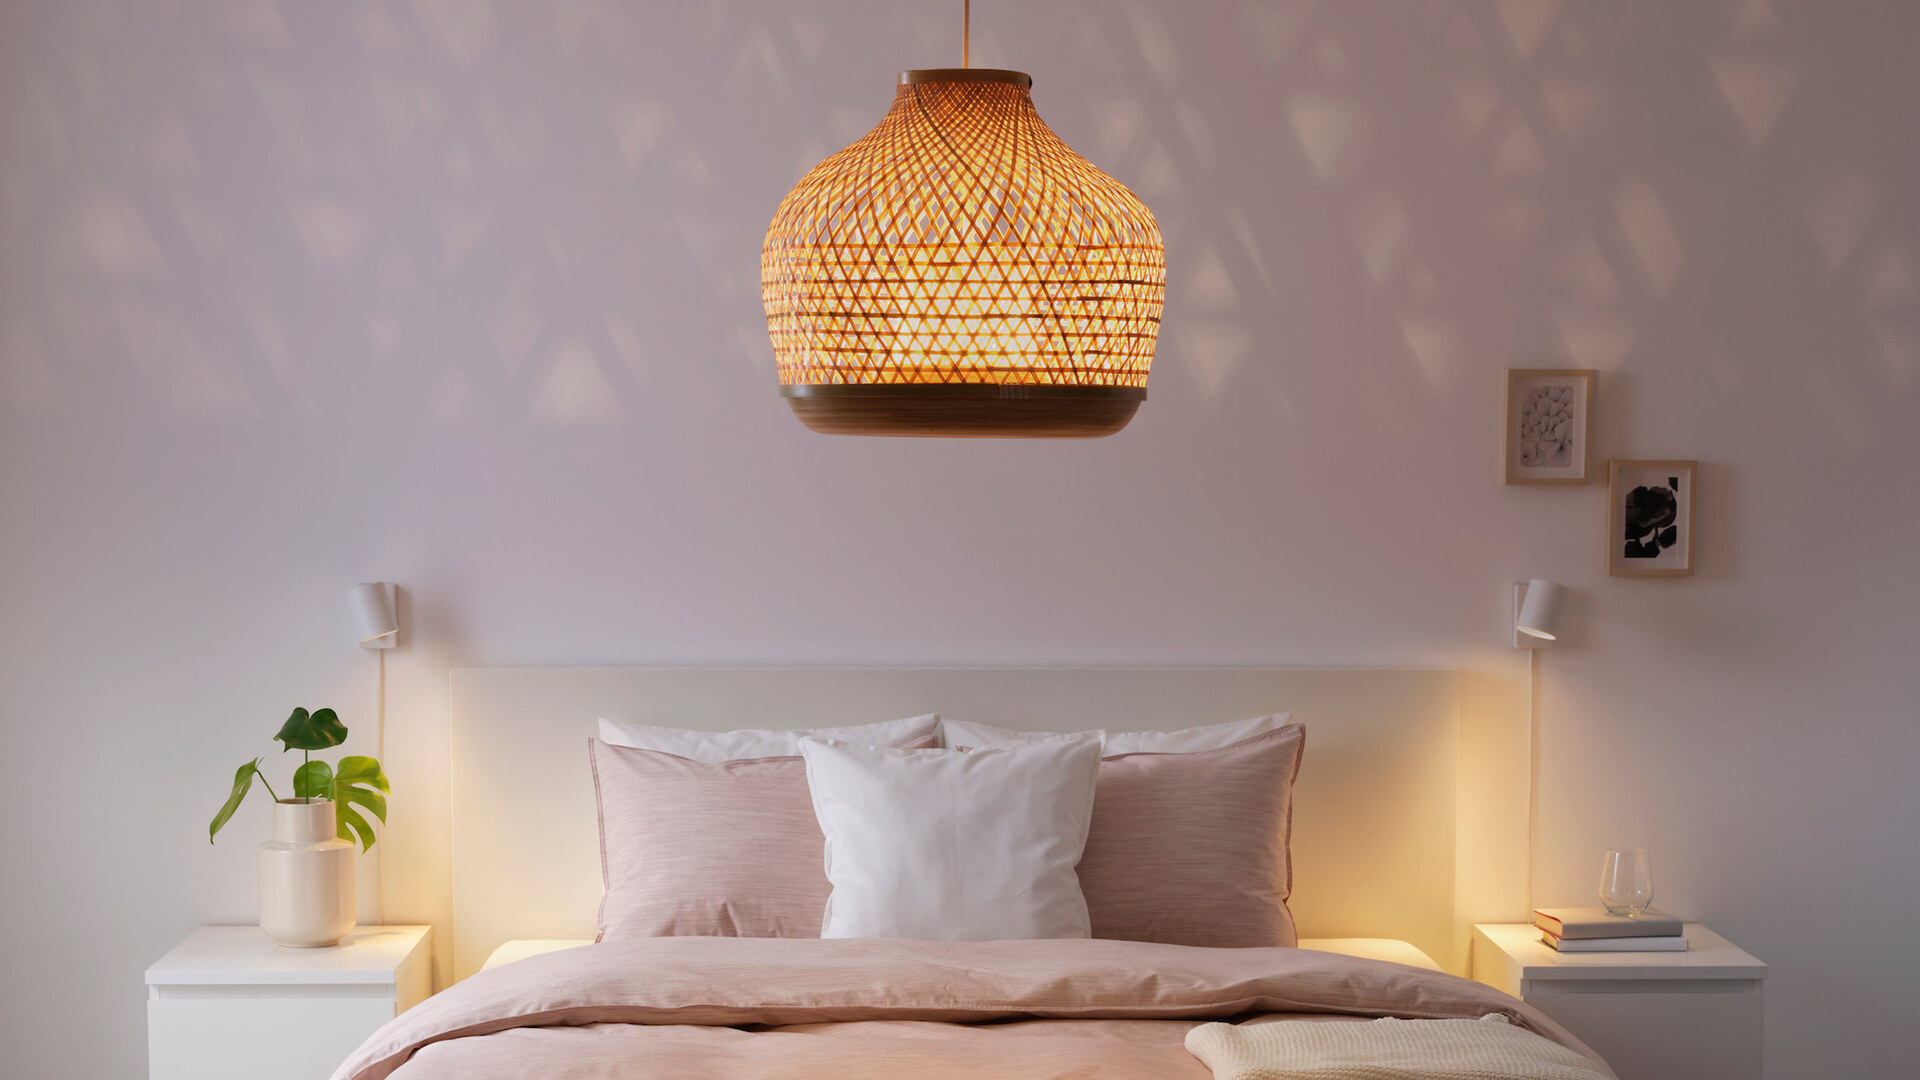 Should Bedrooms Have Ceiling Lights? Experts Have Their Say